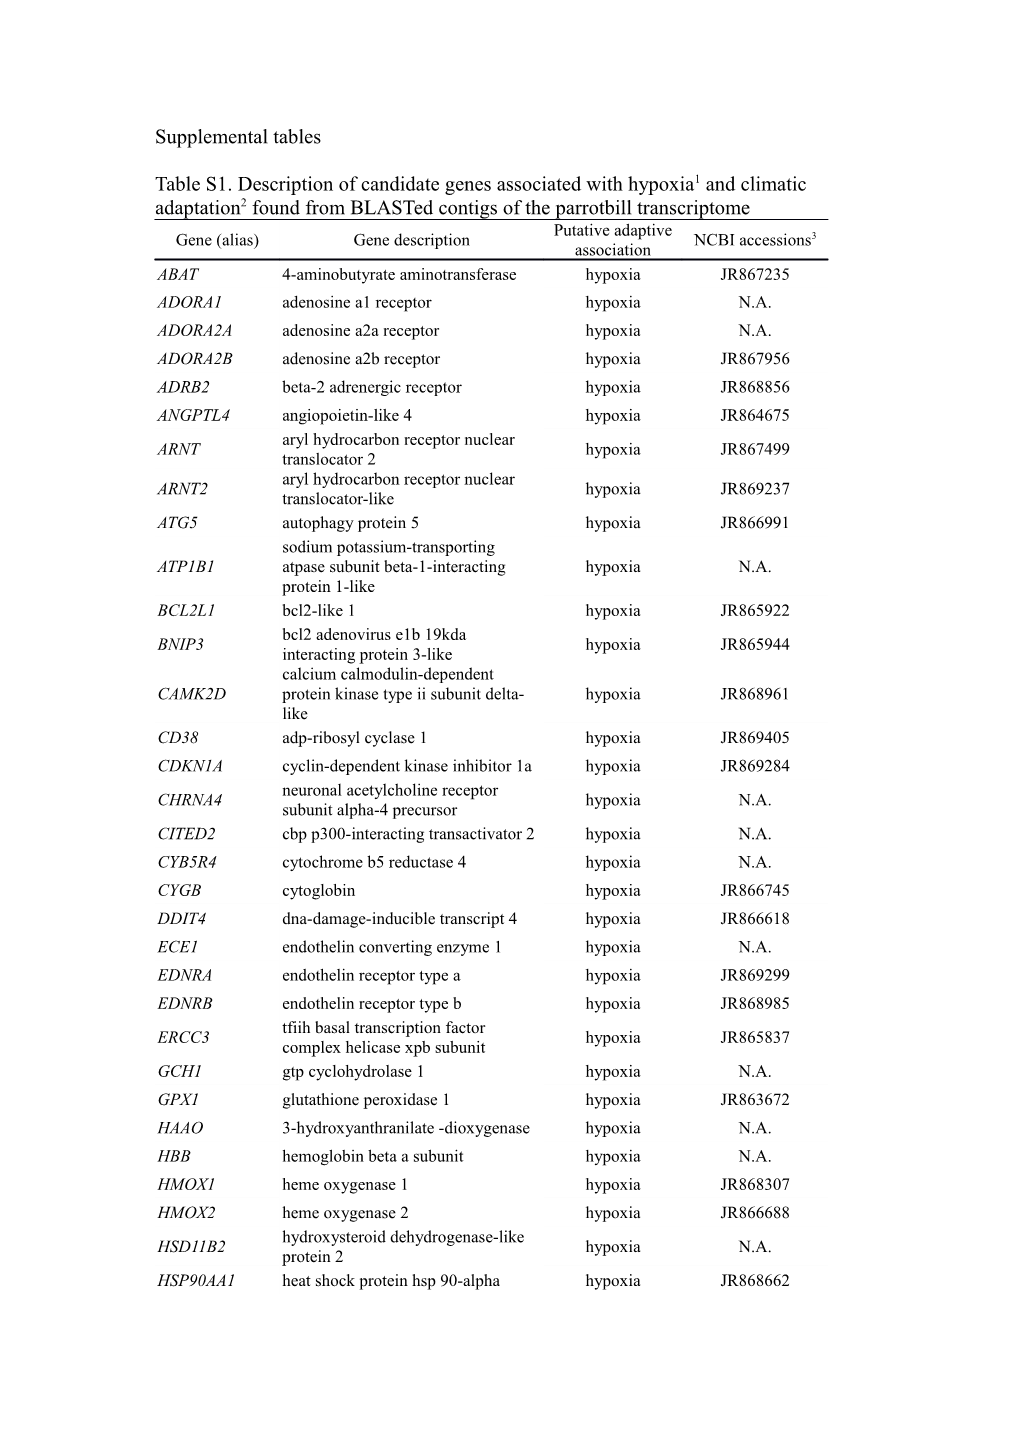 1 Candidate Gene List of Hypoxia Was from Simonson Et Al. (2010)